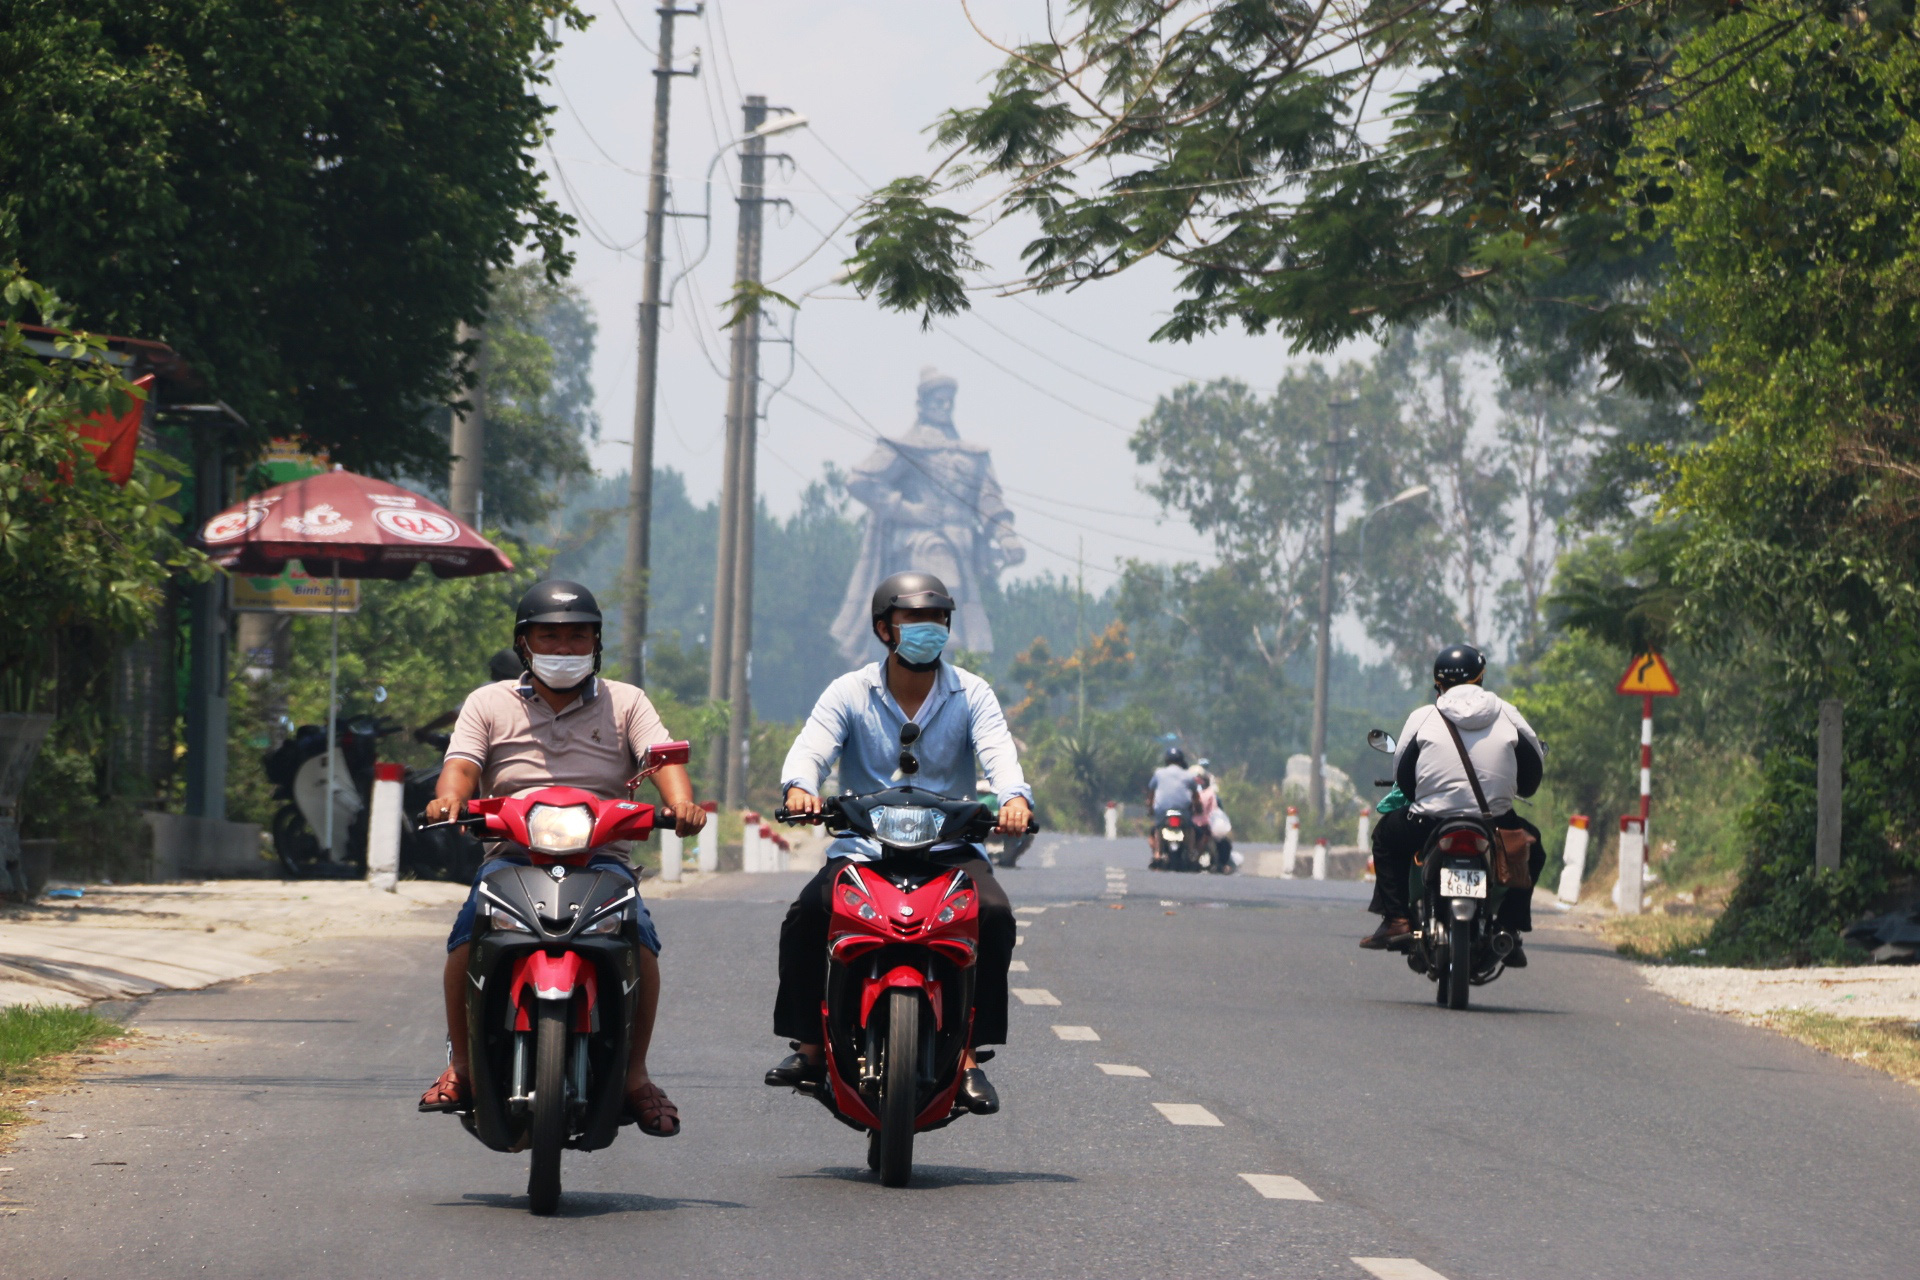 People ride motorbikes in a haze in Hue City, Thua Thien - Hue Province, Vietnam, May 9, 2021. Photo: Nhat Linh / Tuoi Tre